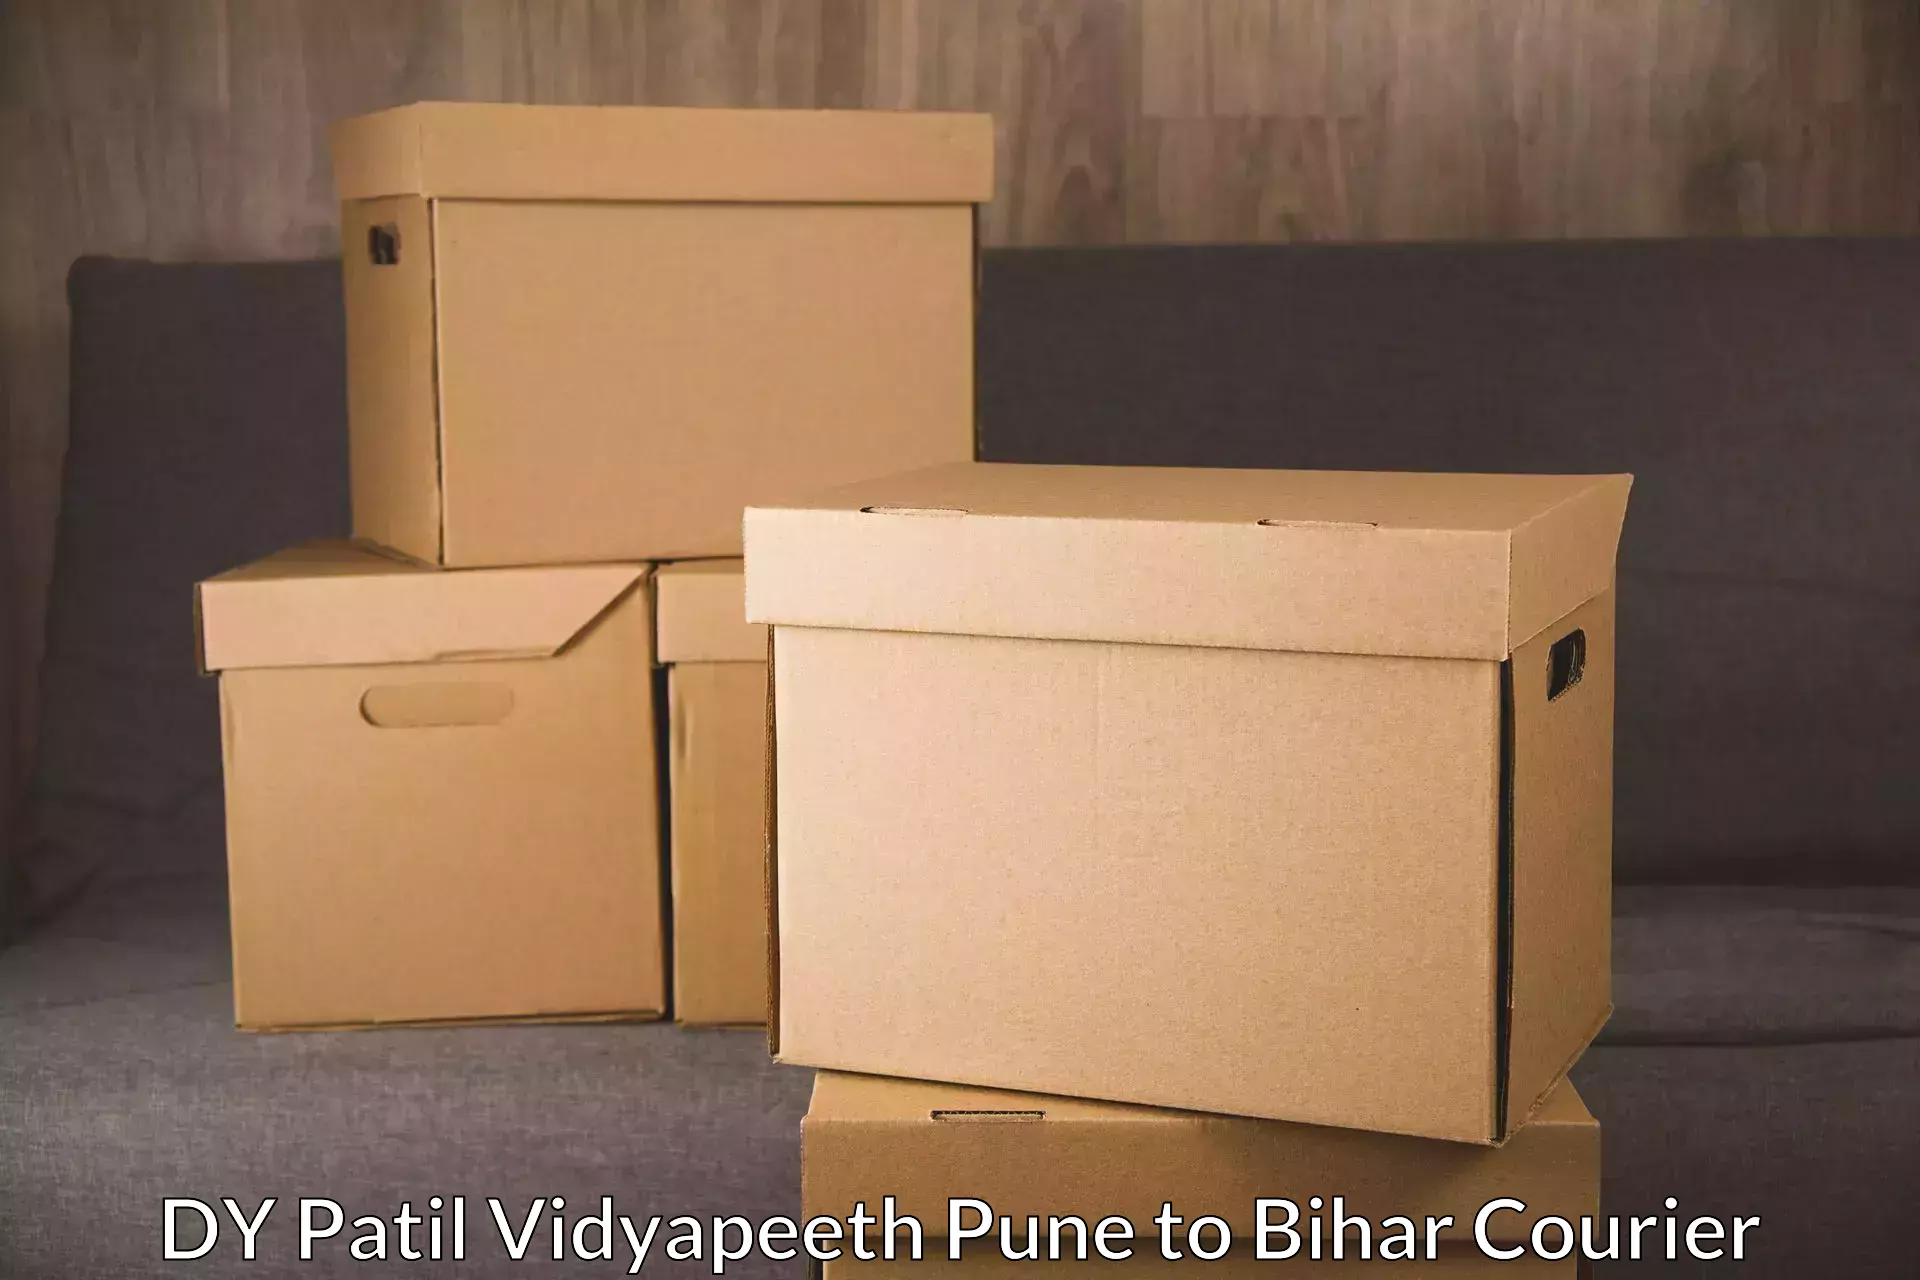 Bulk courier orders DY Patil Vidyapeeth Pune to Kumarkhand